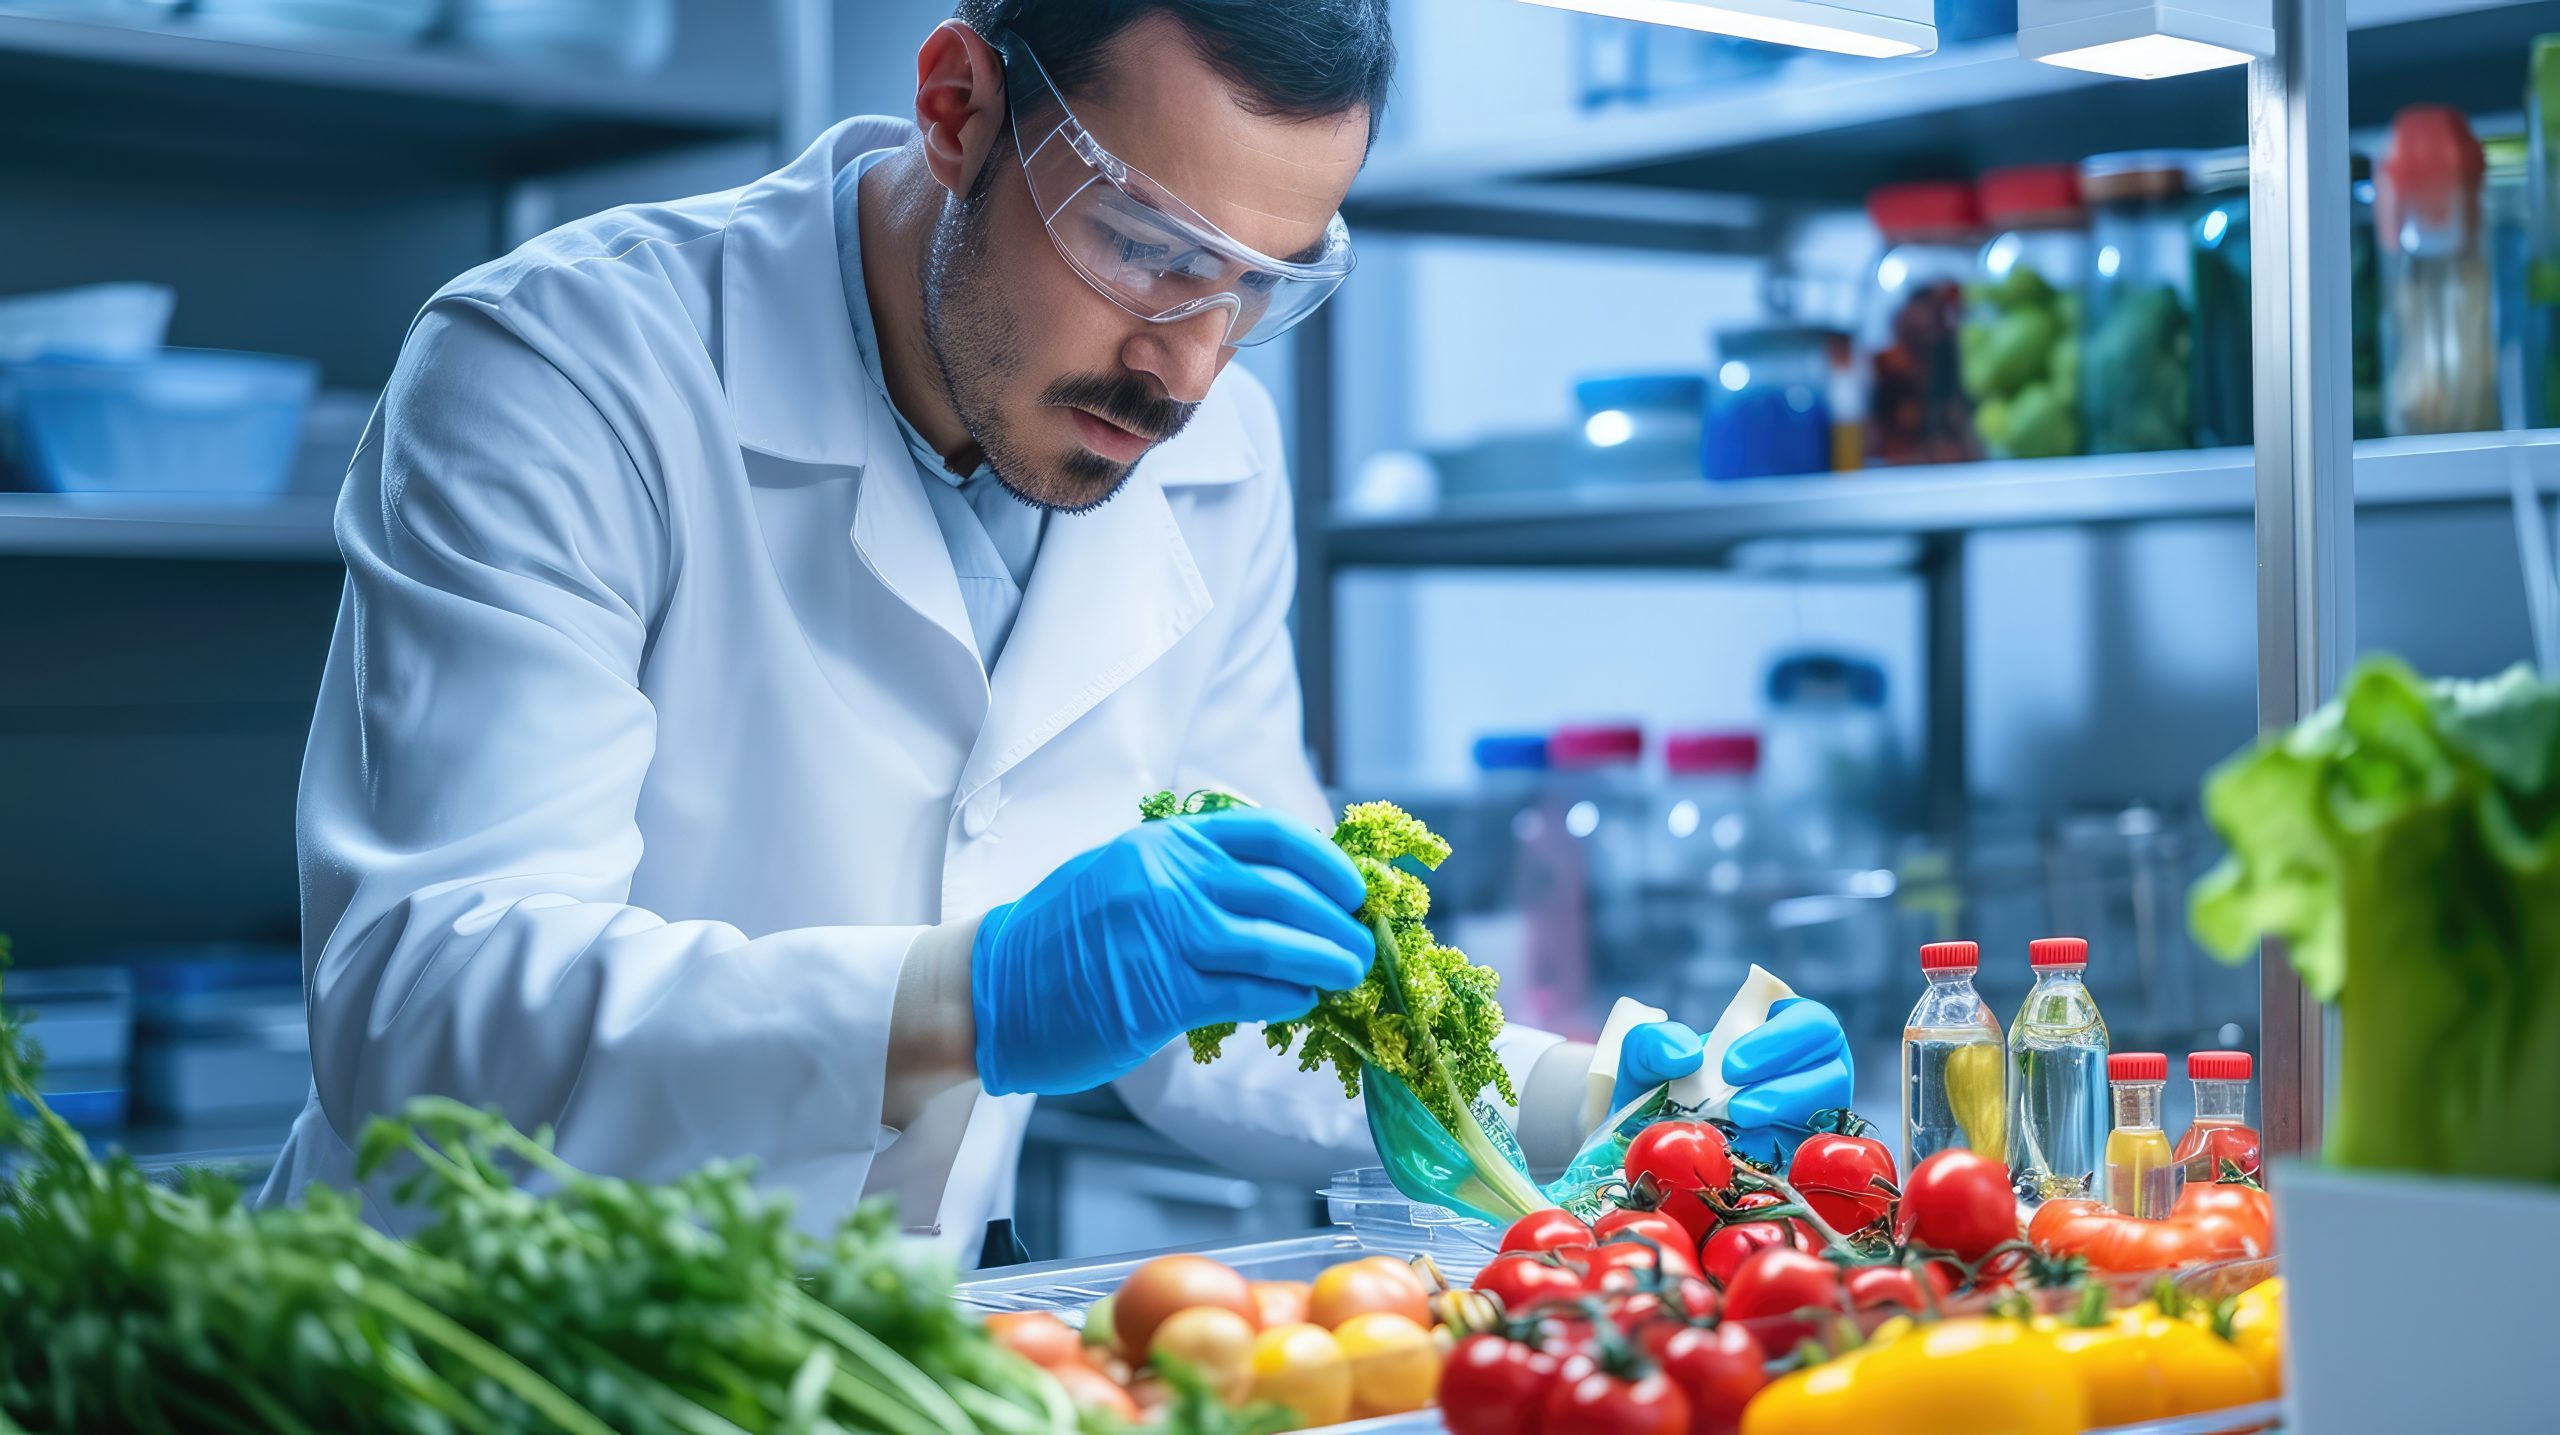 How Are Food Safety Audits Done In a Digital World?